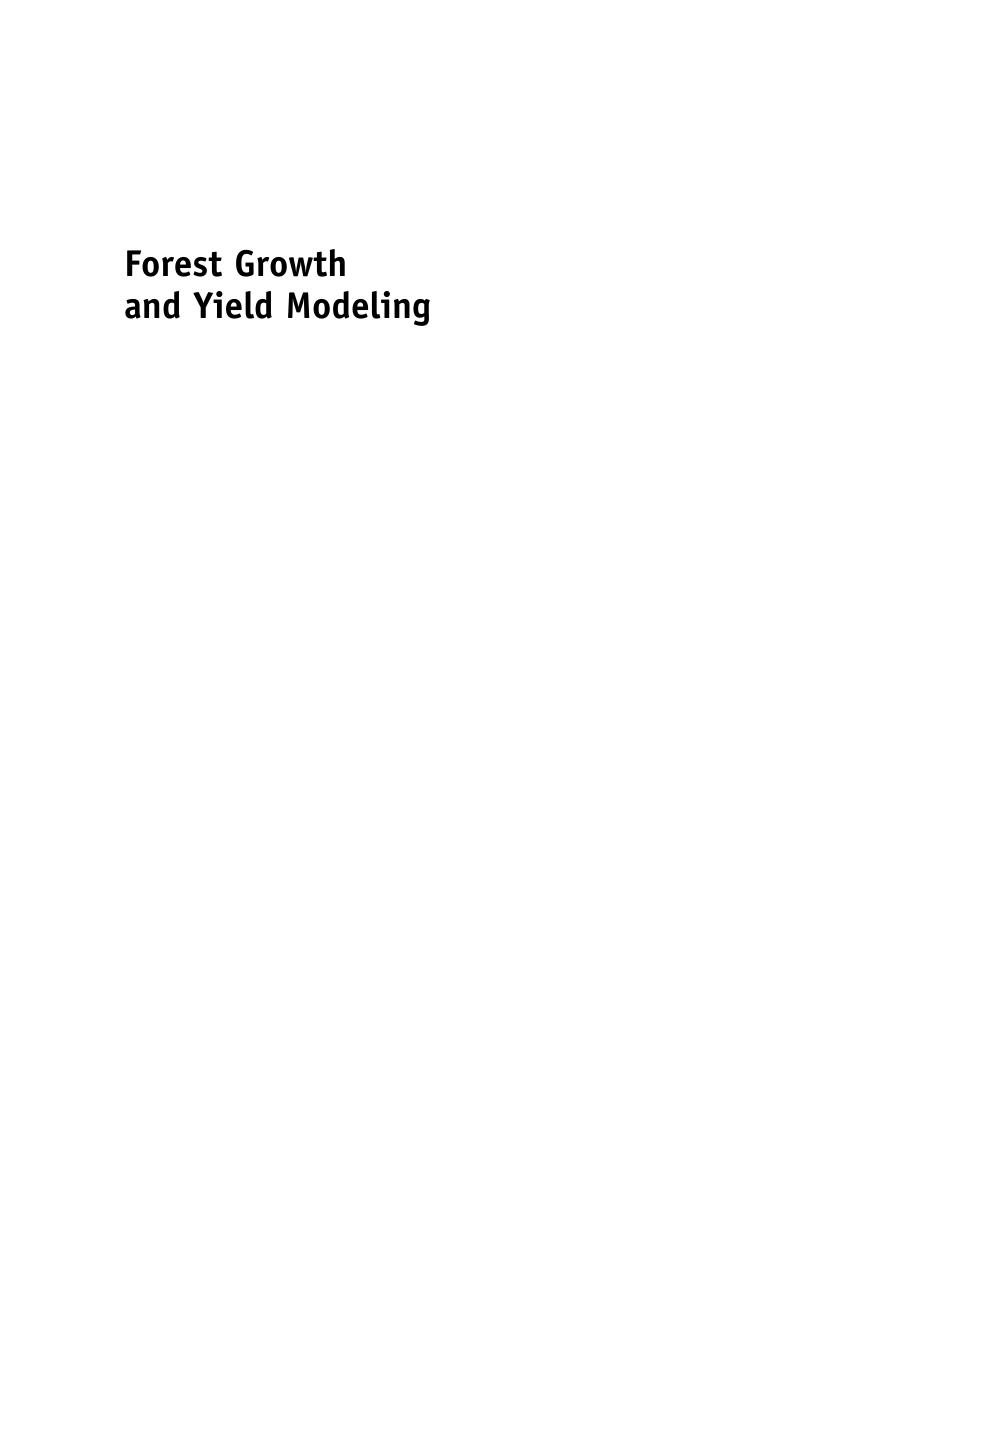 Forest Growth and Yield Modeling 2011